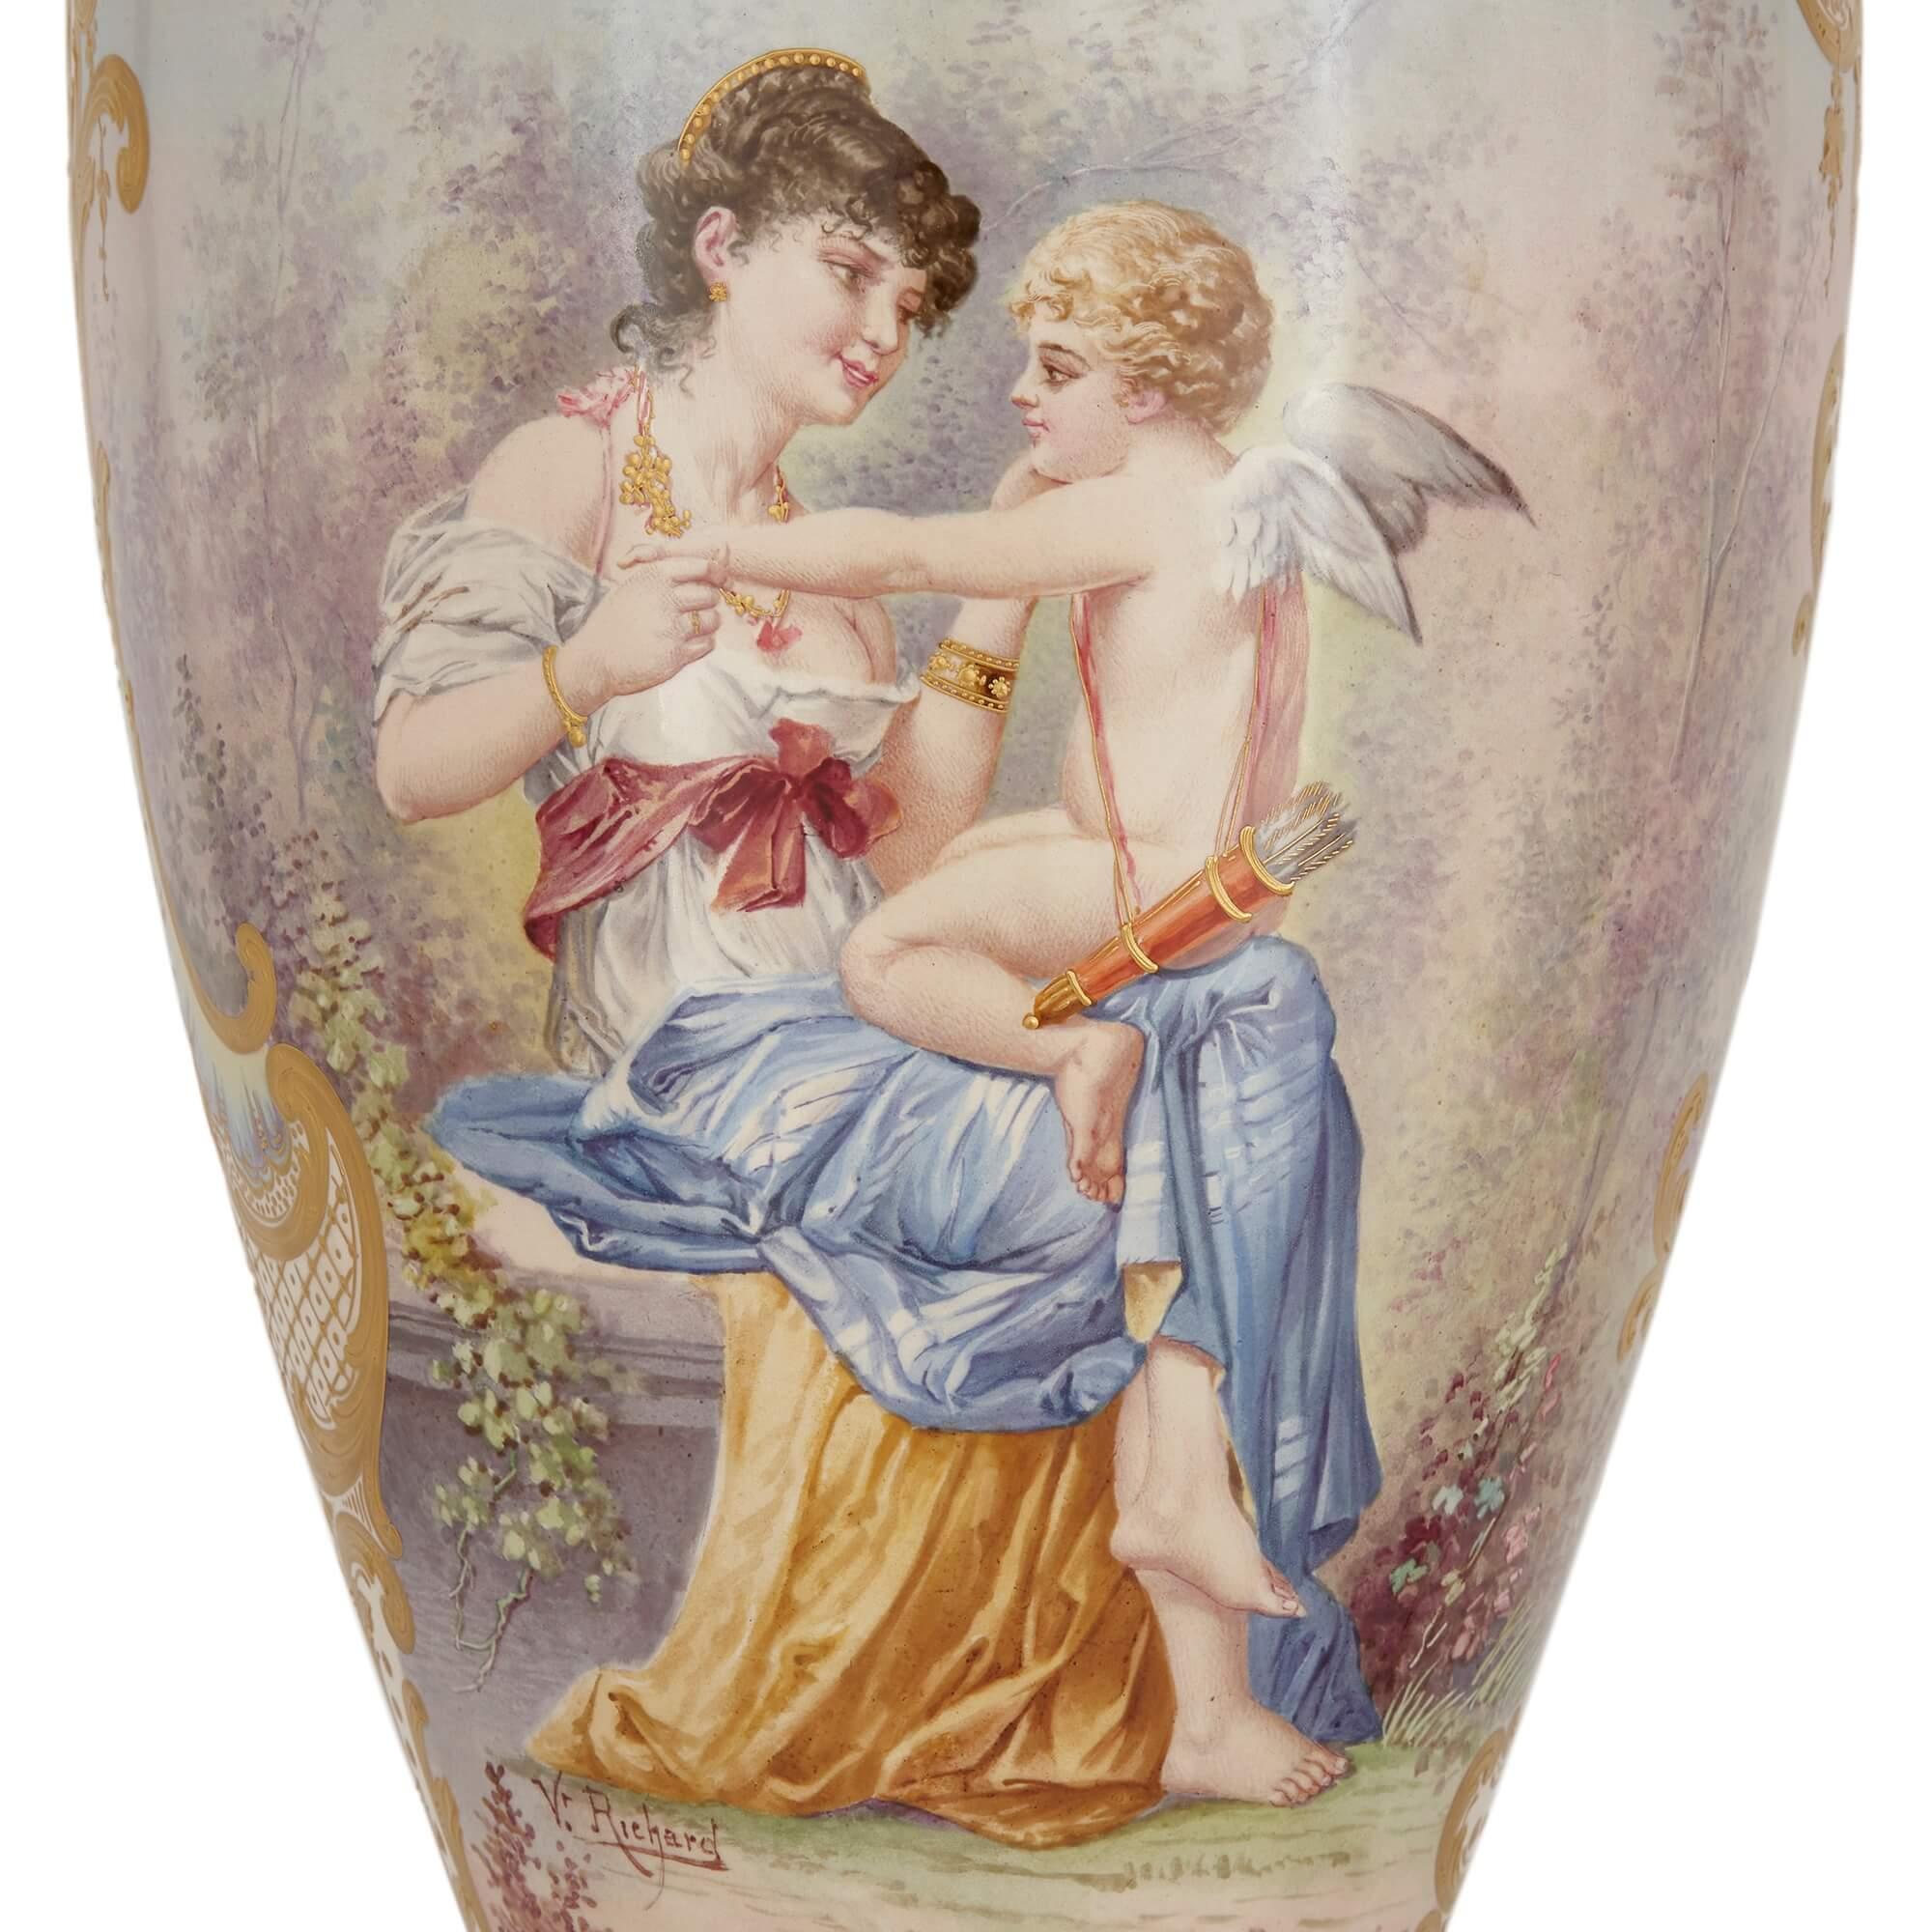 Pair of large Sèvres style gilt porcelain mounted vases.
French, Late 19th century.
Height 97cm, diameter 26cm.

These beautiful vases are a pair of Sèvres style wares, in the manner of the renowned French porcelain manufactory, and were made in